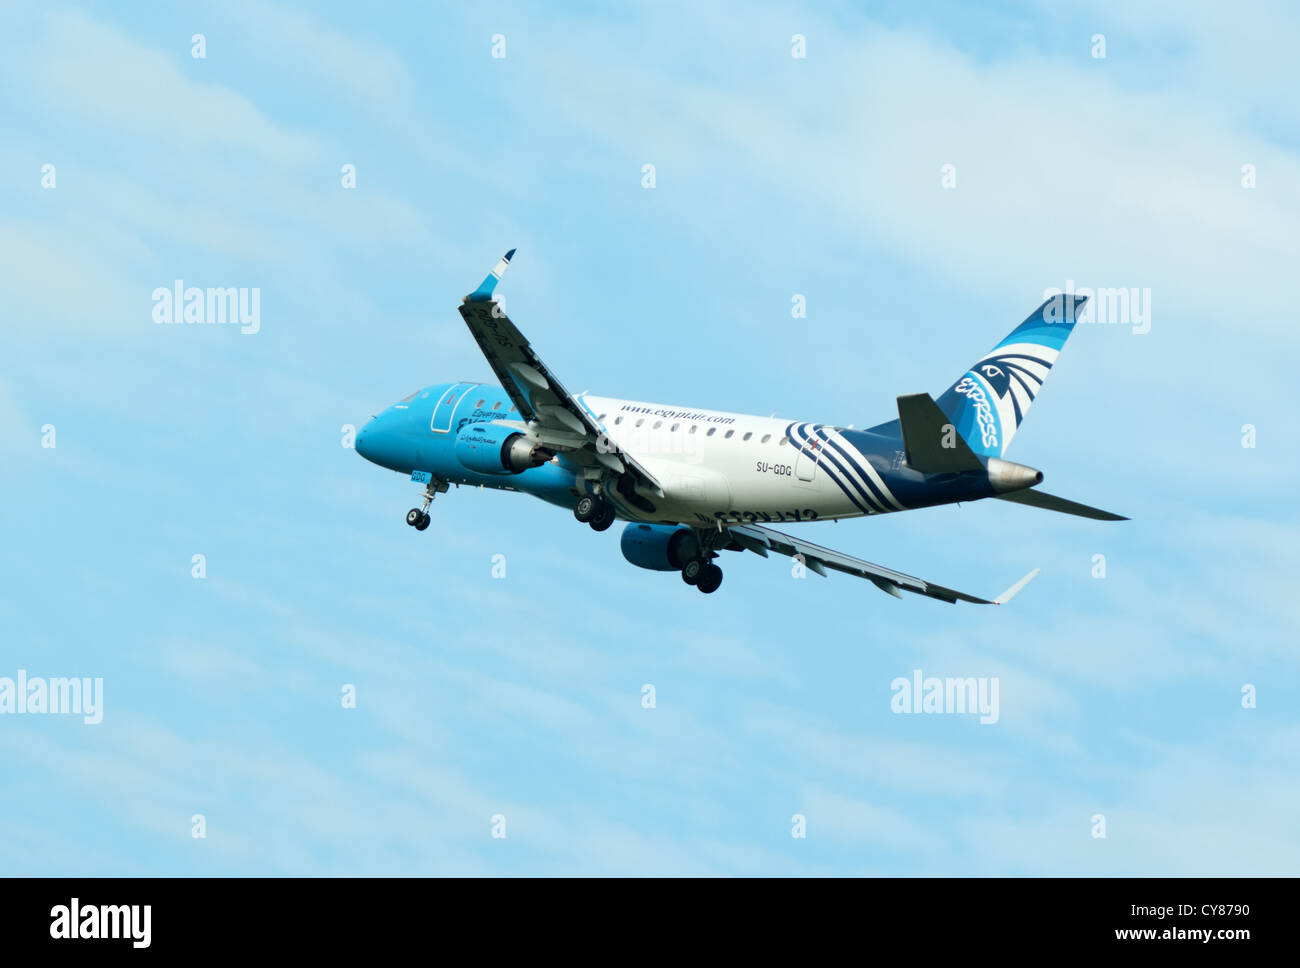 Egyptair airplane flying in the air Stock Photo